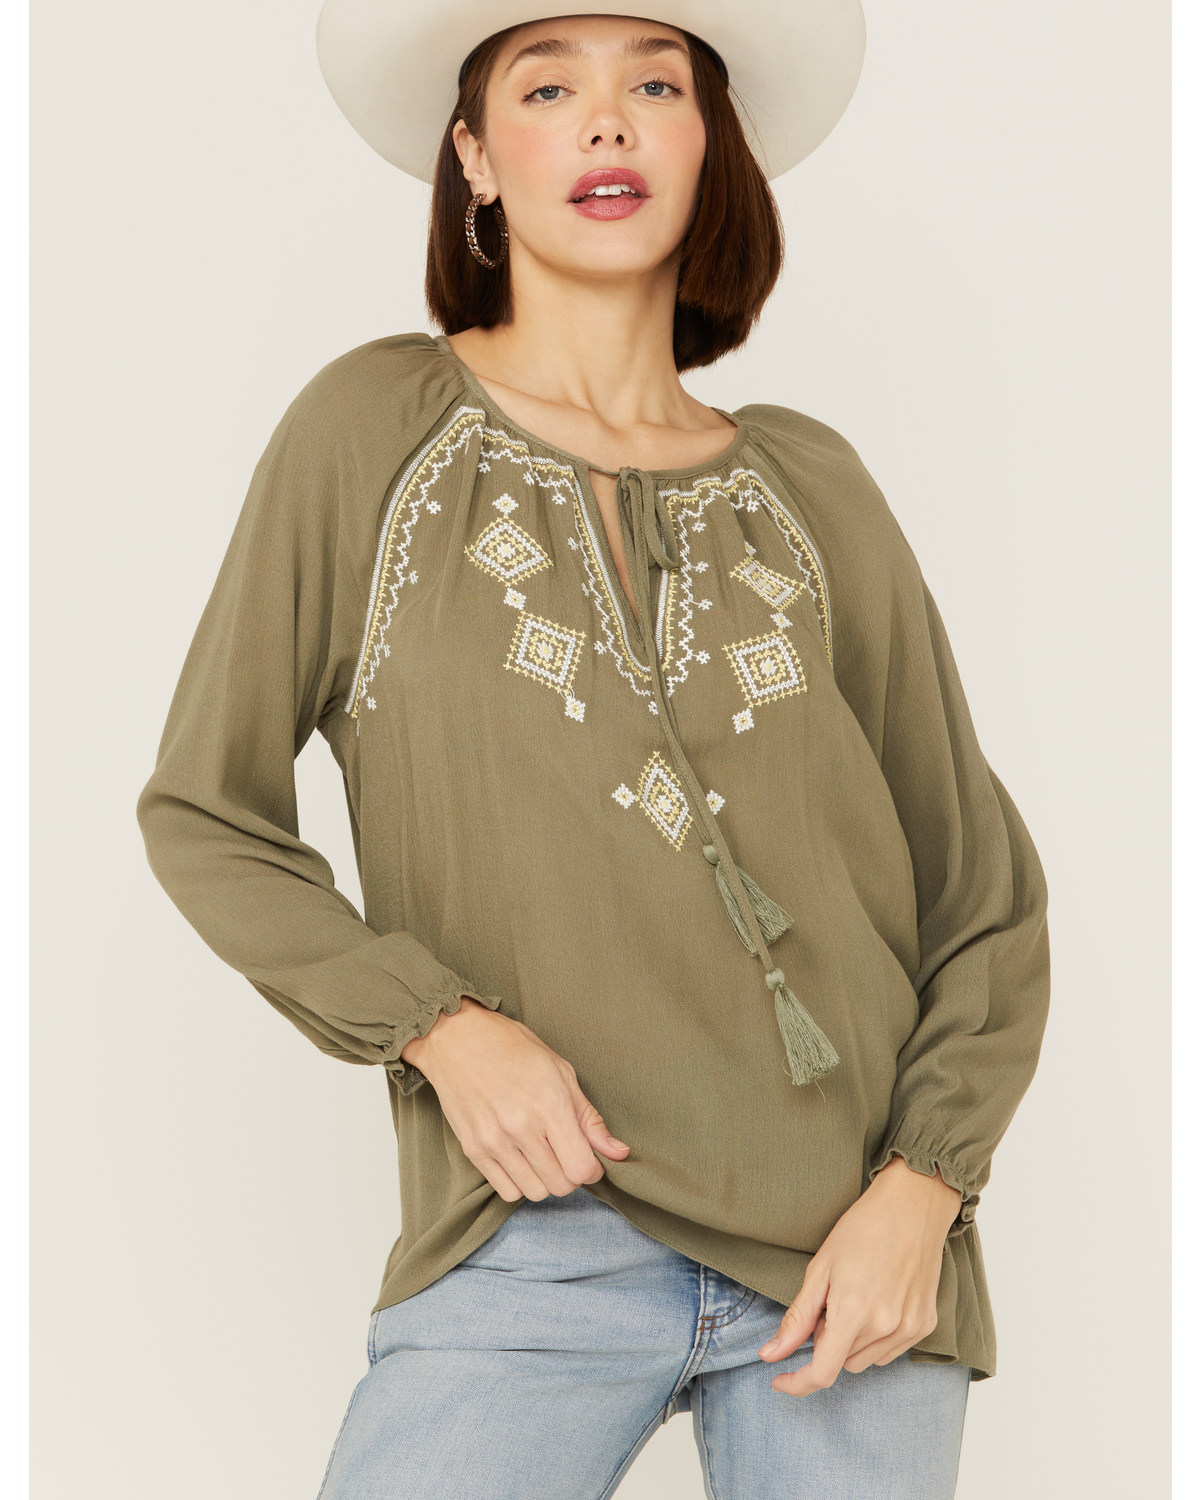 Miss Me Women's Olive Embroidered Southwestern Tassel Top